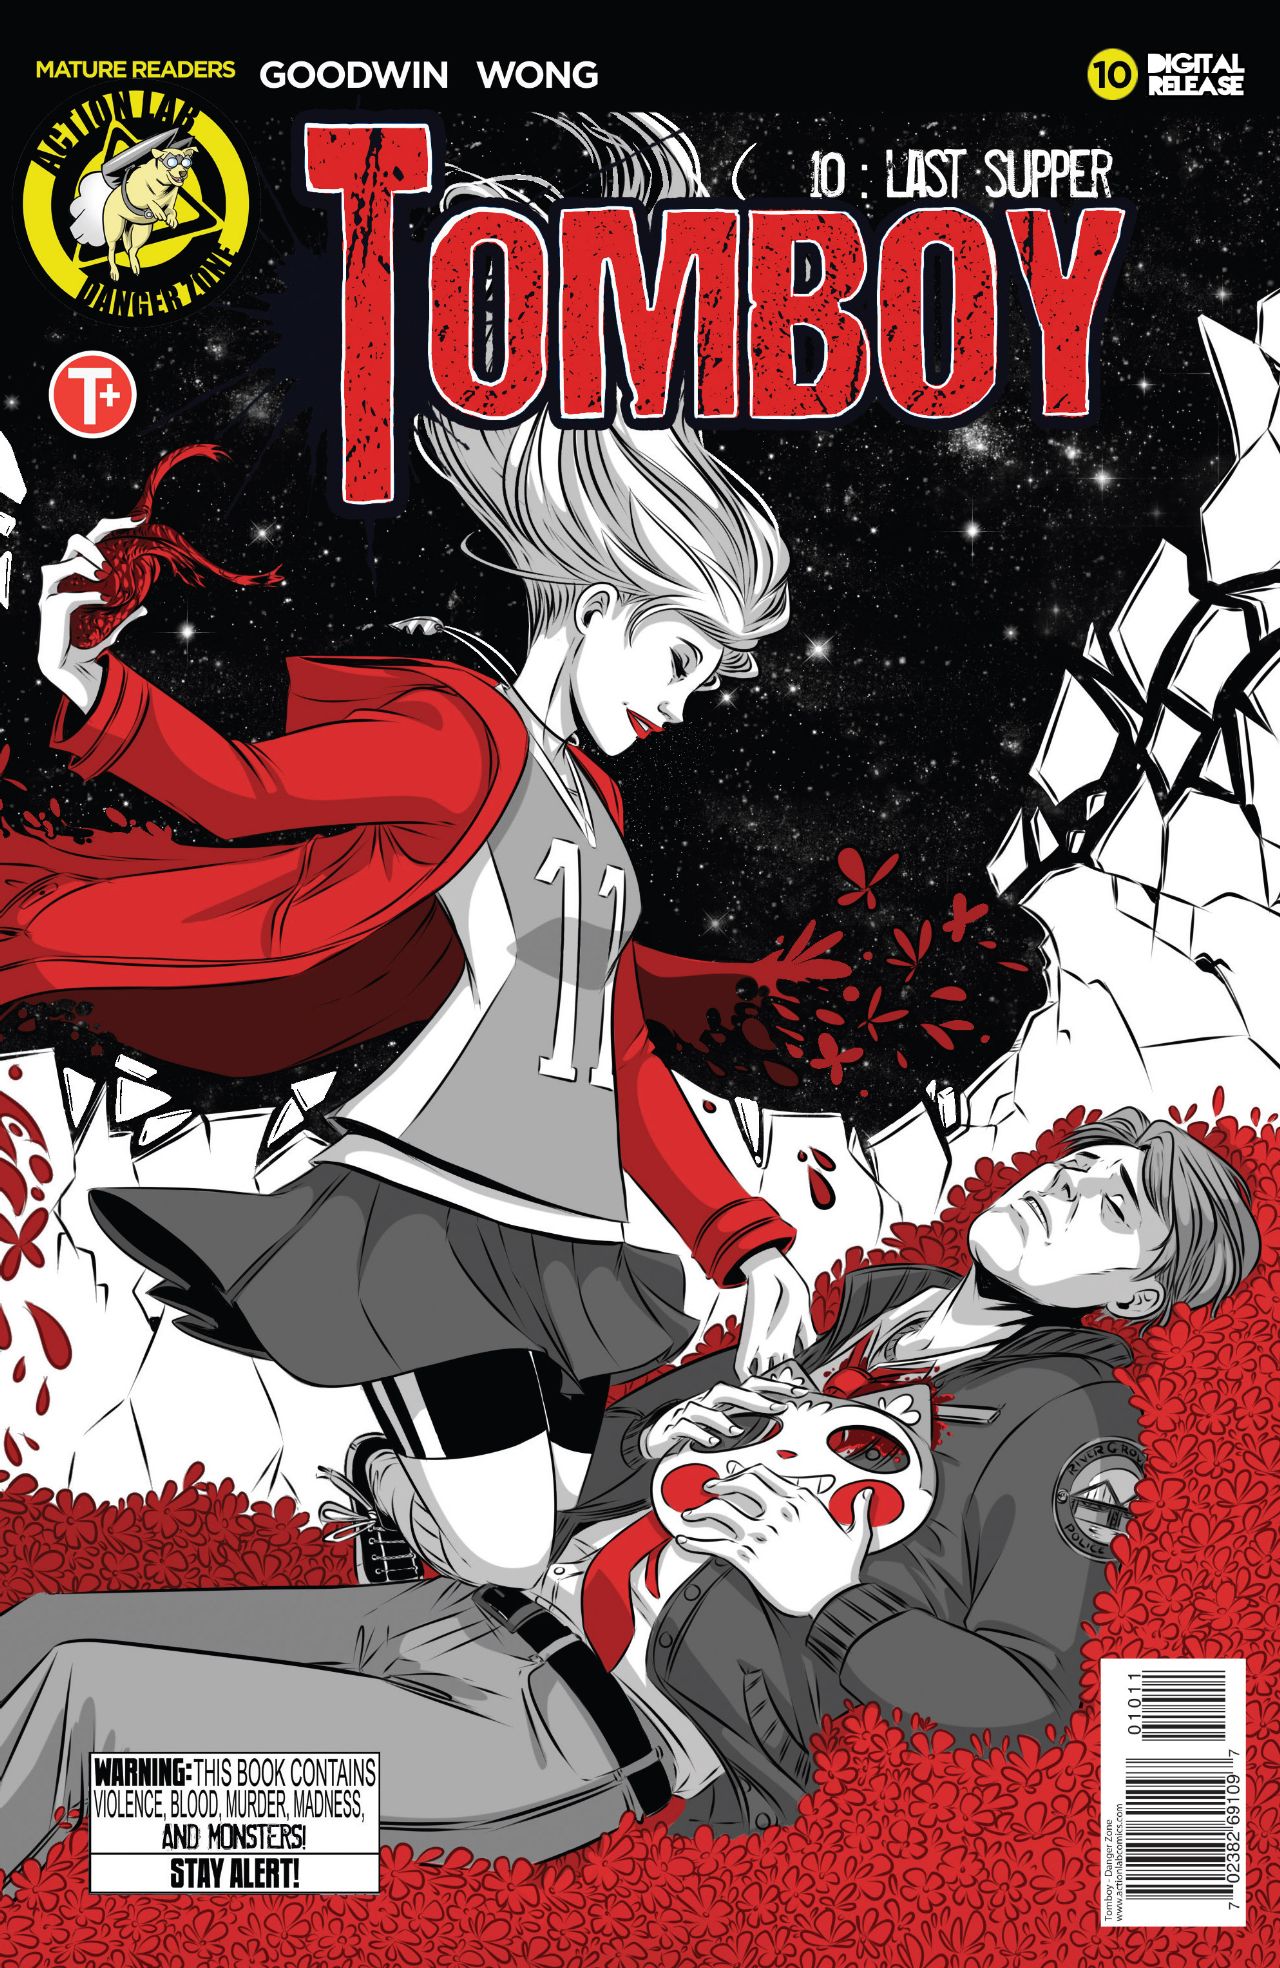 Tomboy #10 – Review